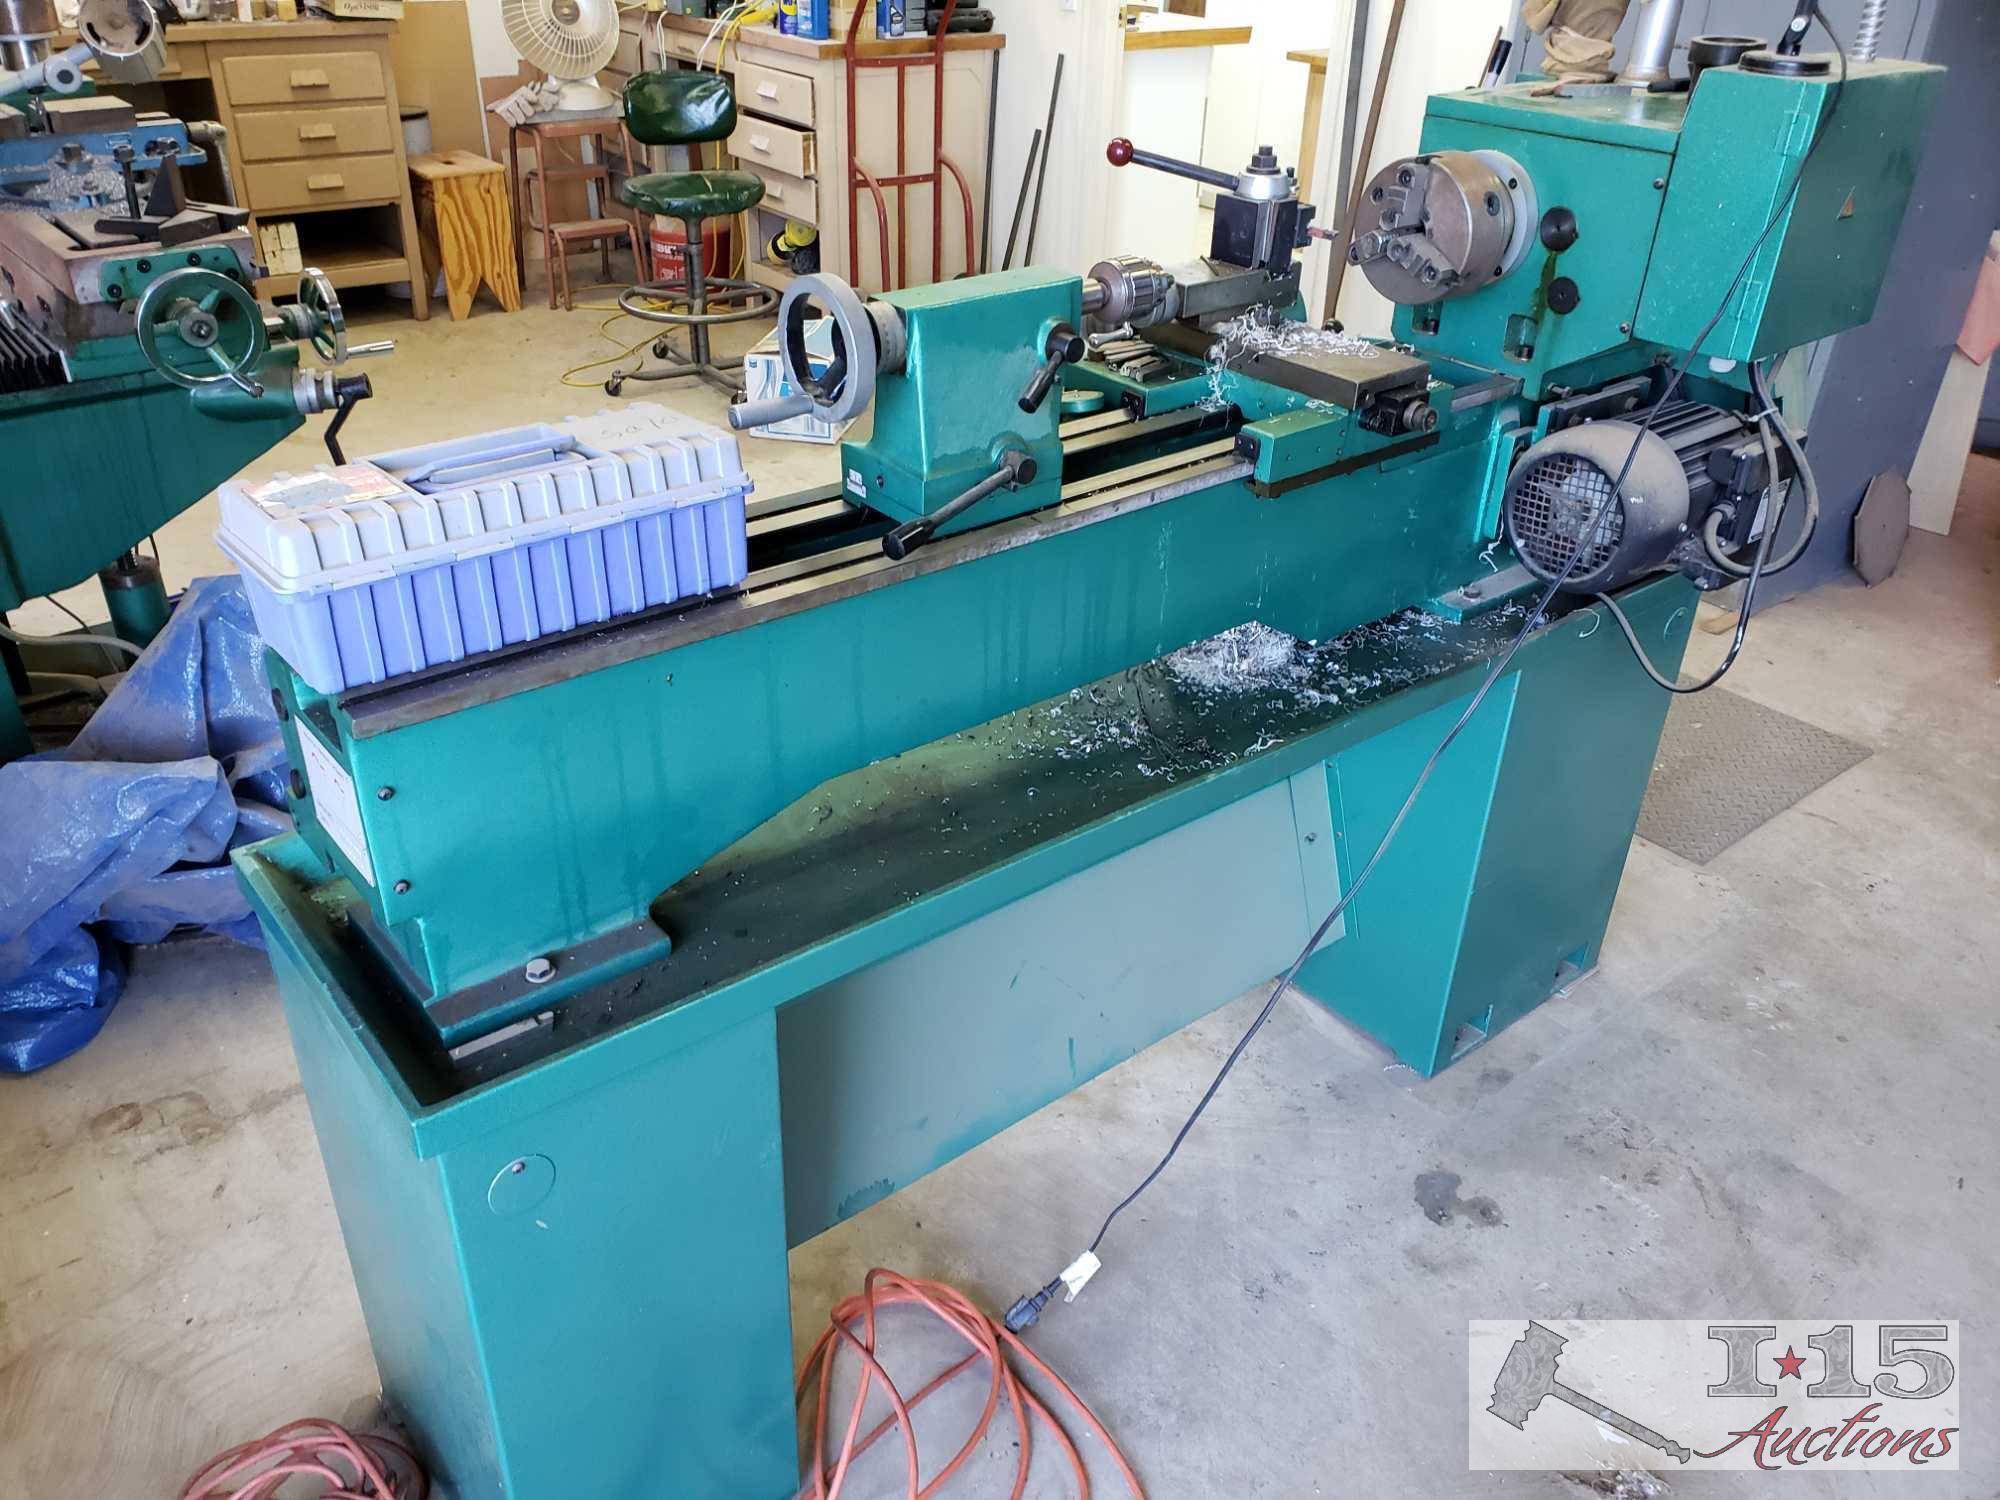 Grizzly Industrial Lathe Model G4016, with Accessories